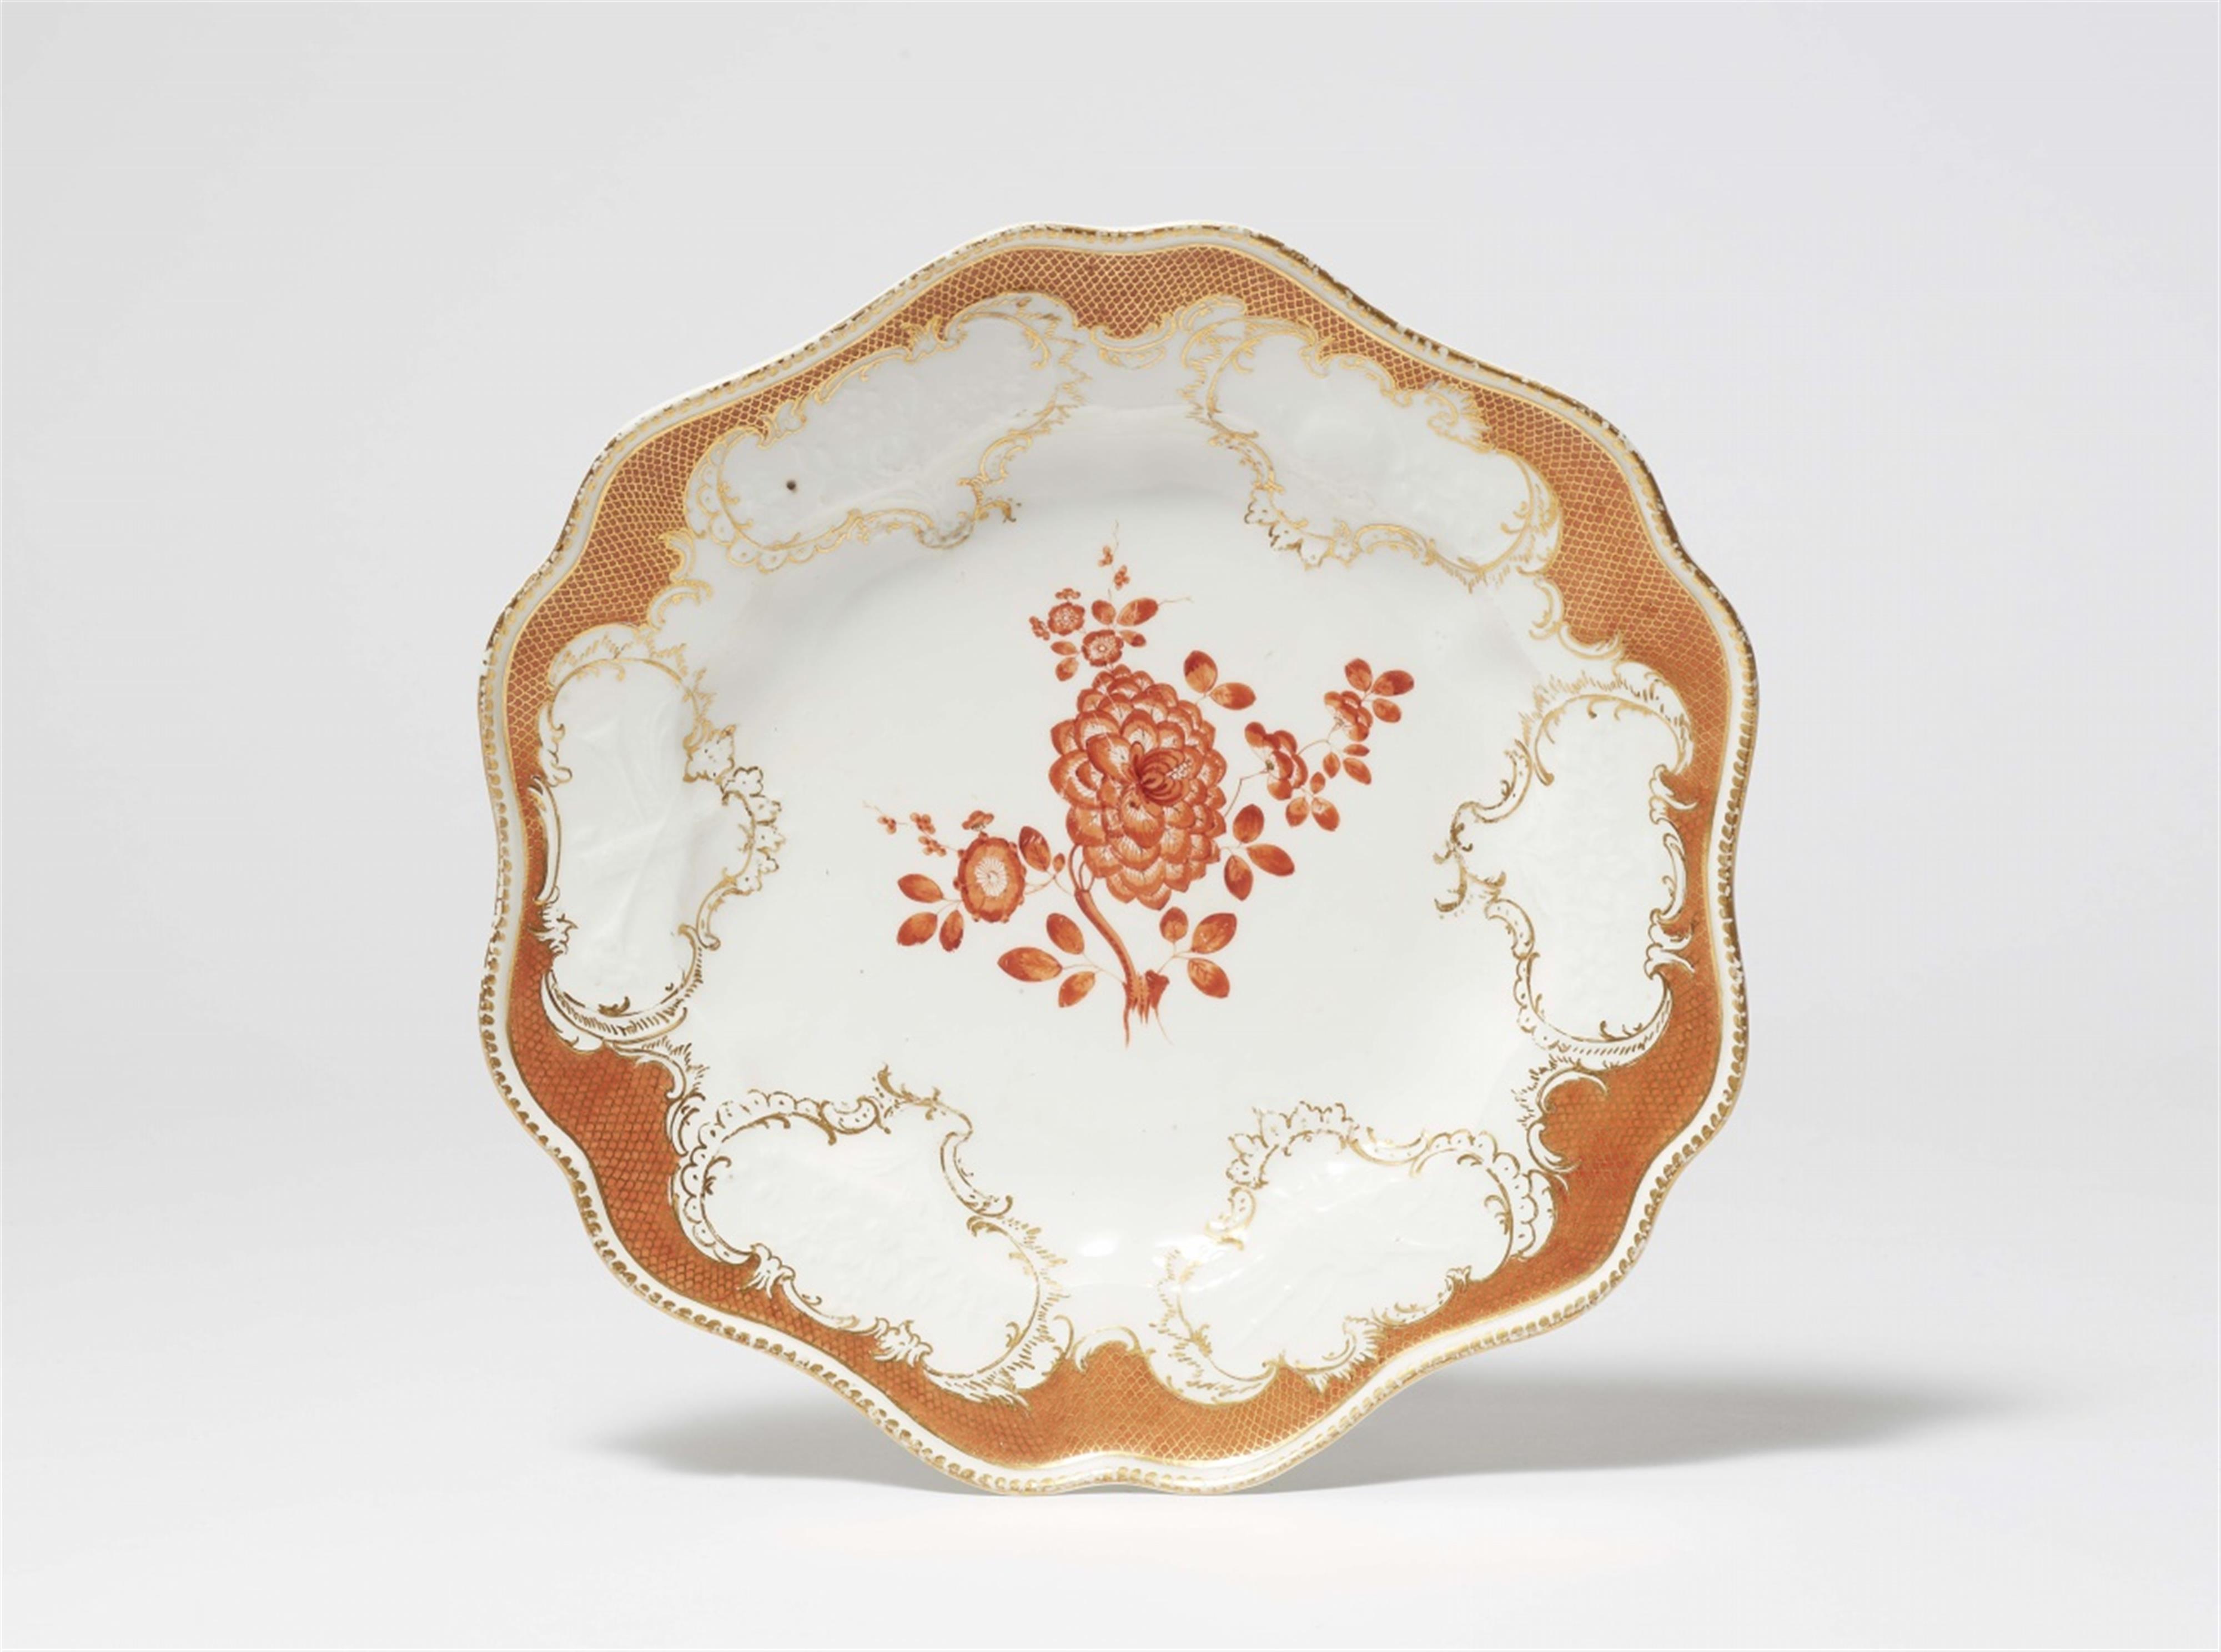 A Meissen porcelain dinner plate from the service with red mosaic pattern borders - image-1